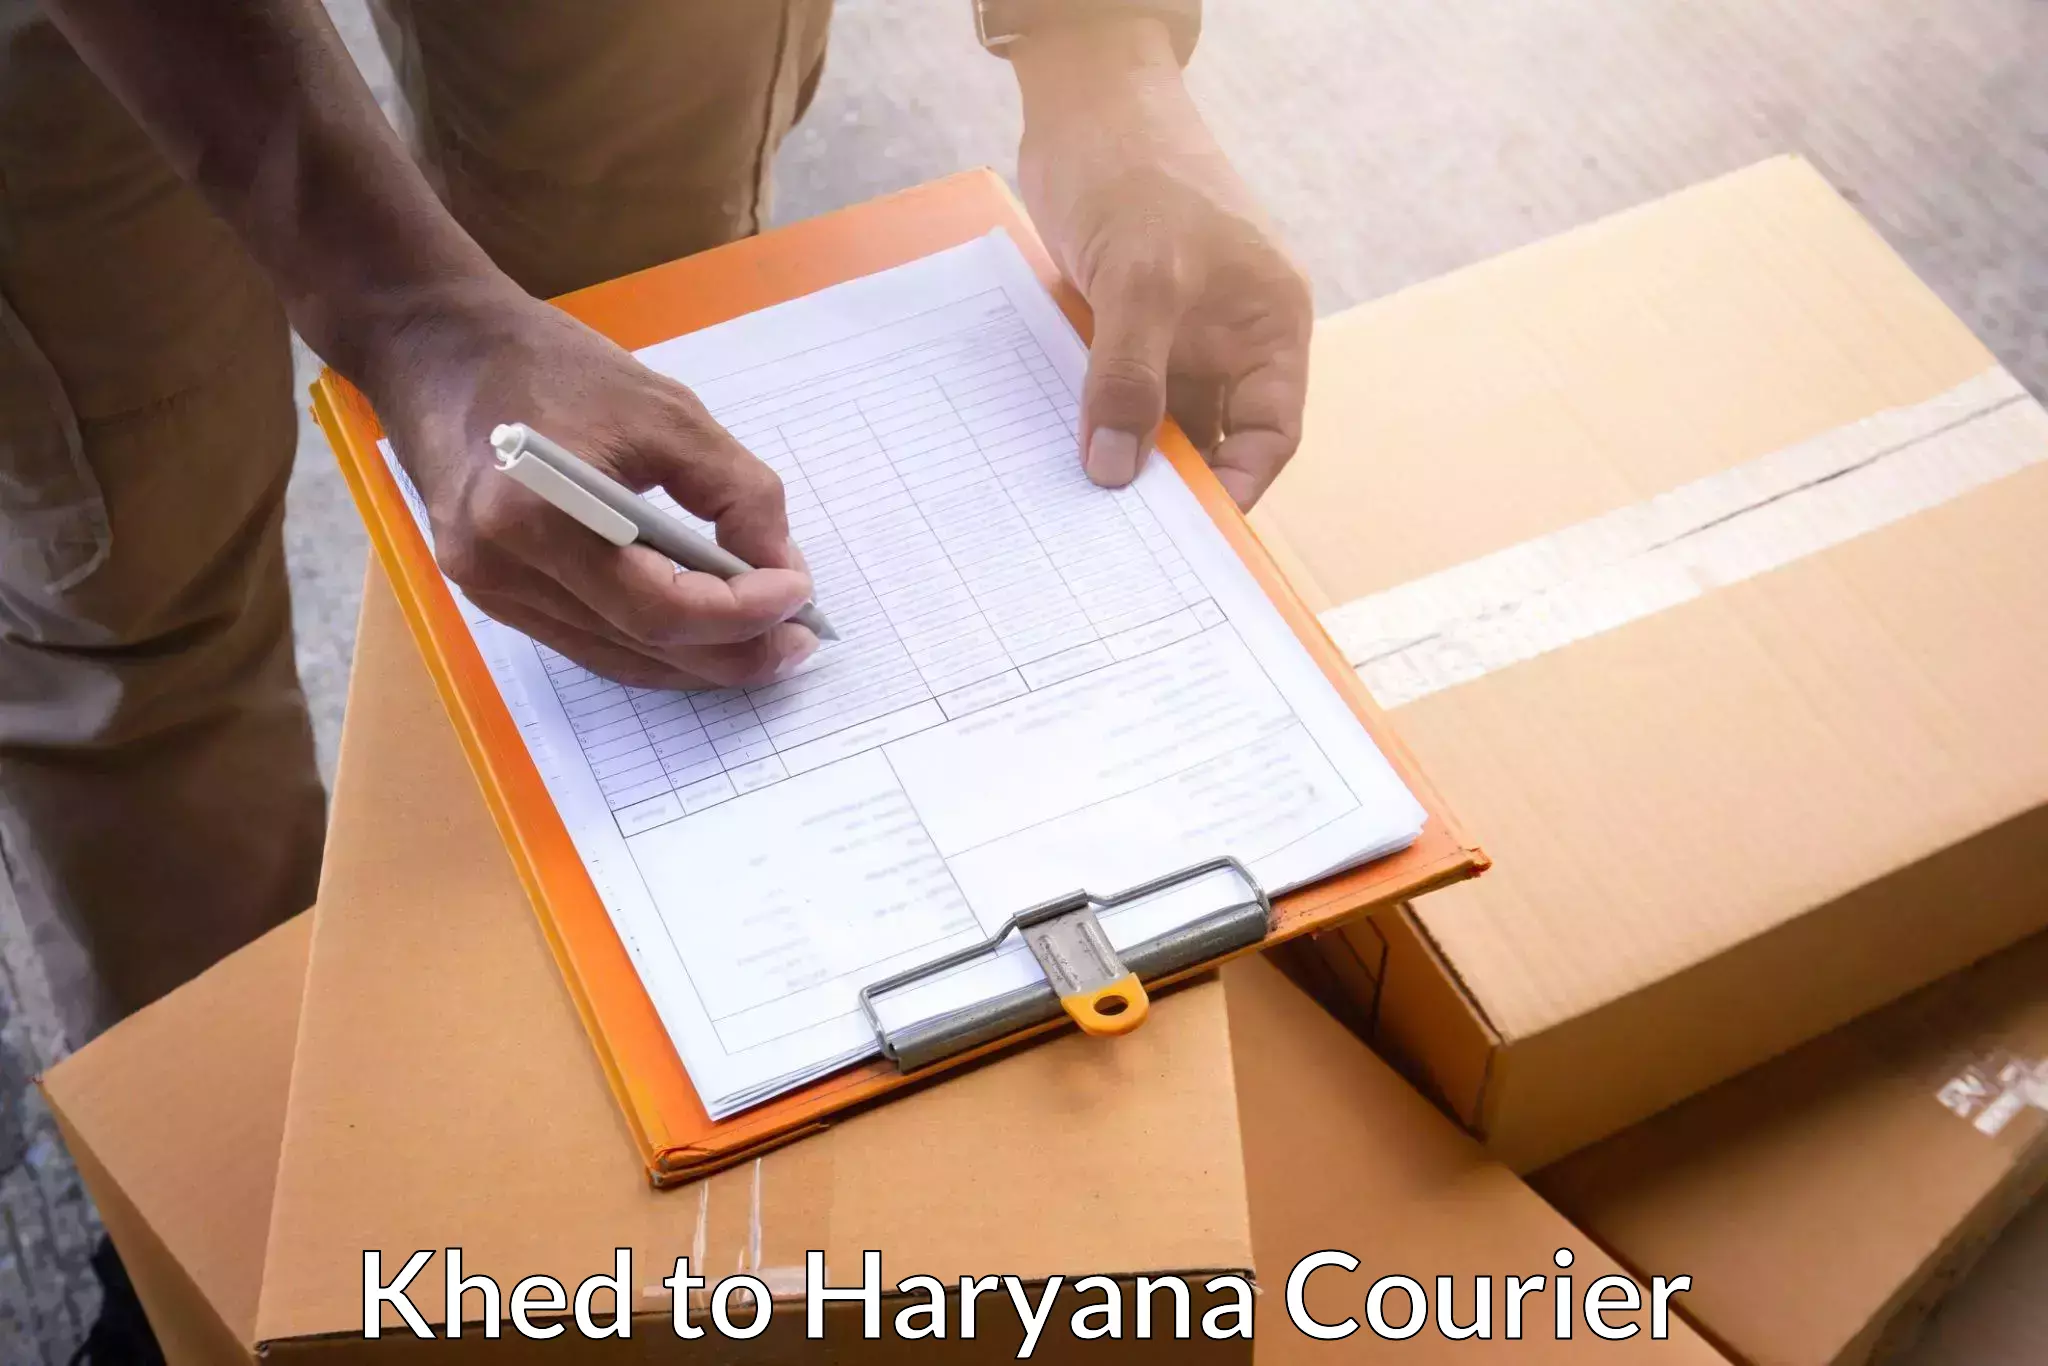 Efficient order fulfillment Khed to Chirya